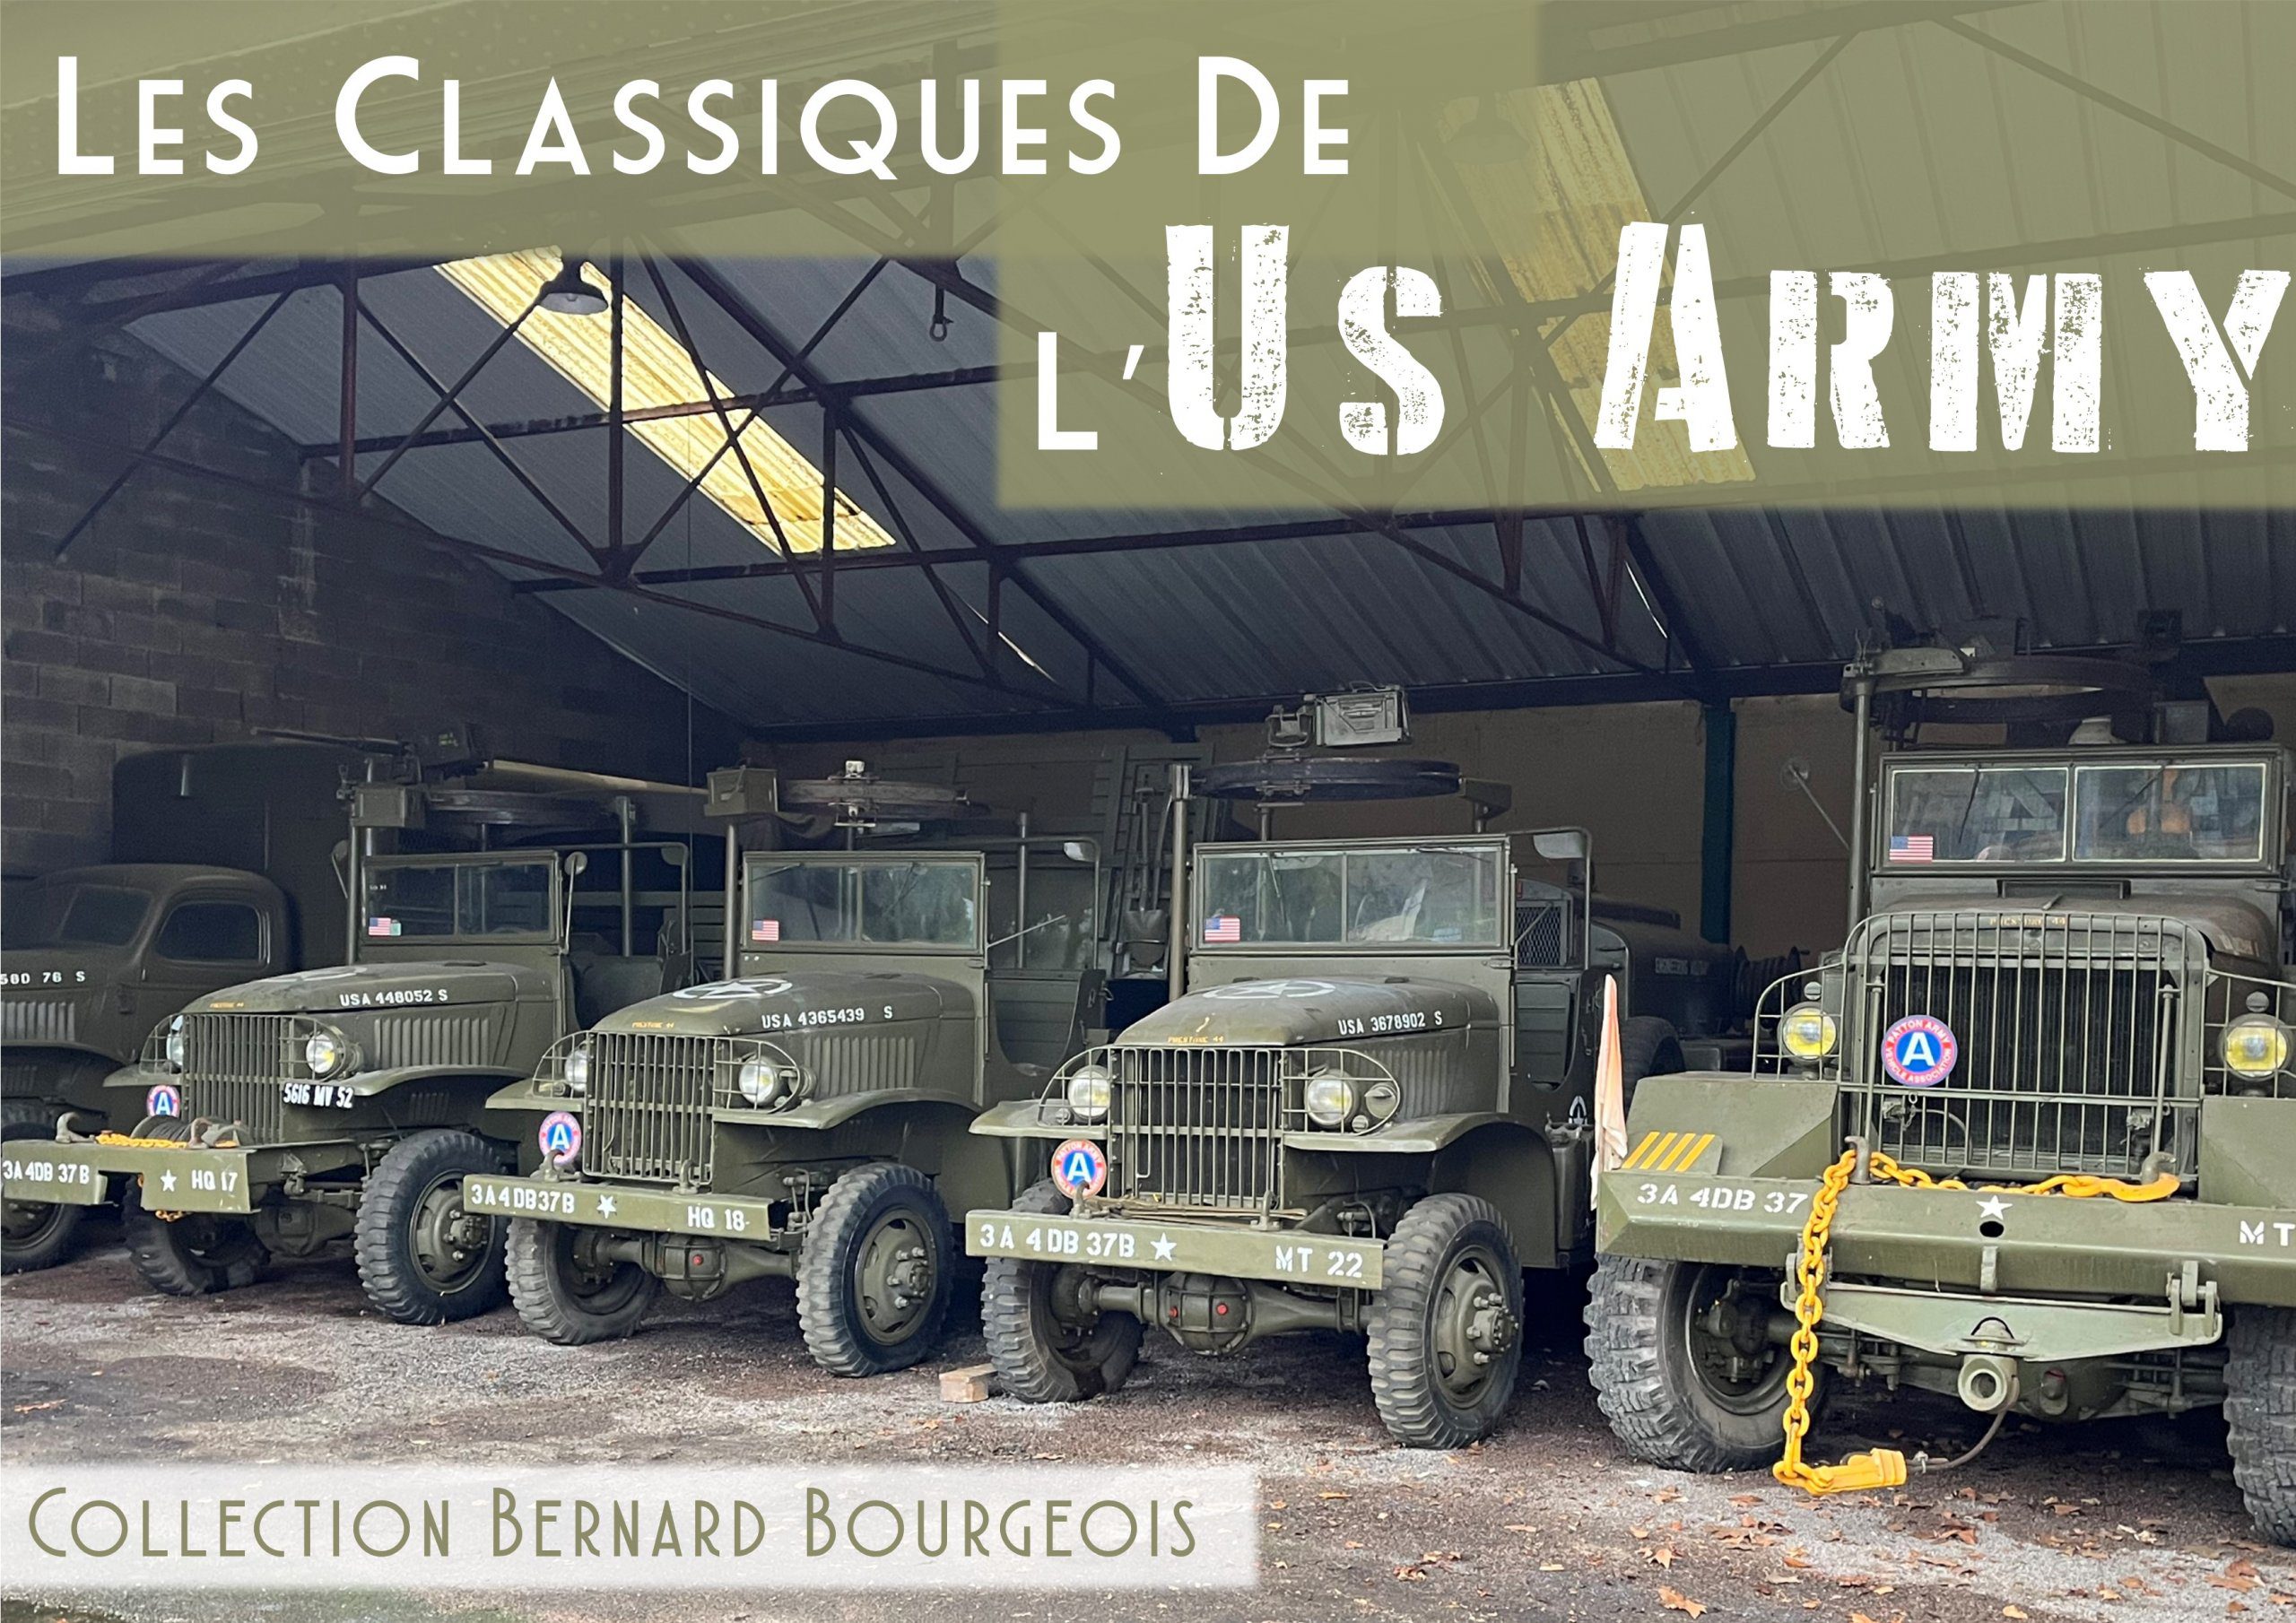 The classics of the Us Army – Auction on April 2 & 3